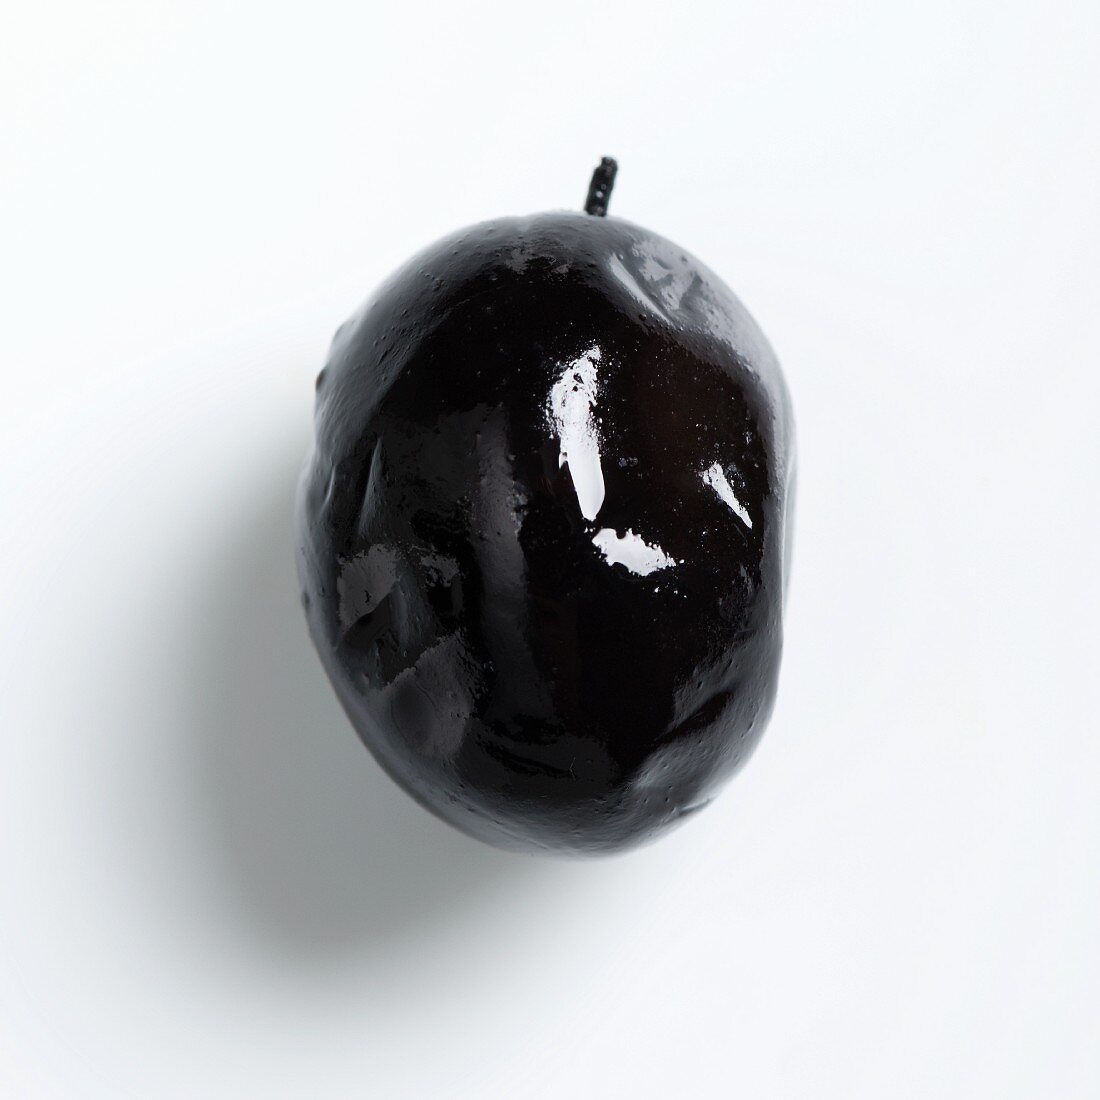 A black olive on a white surface